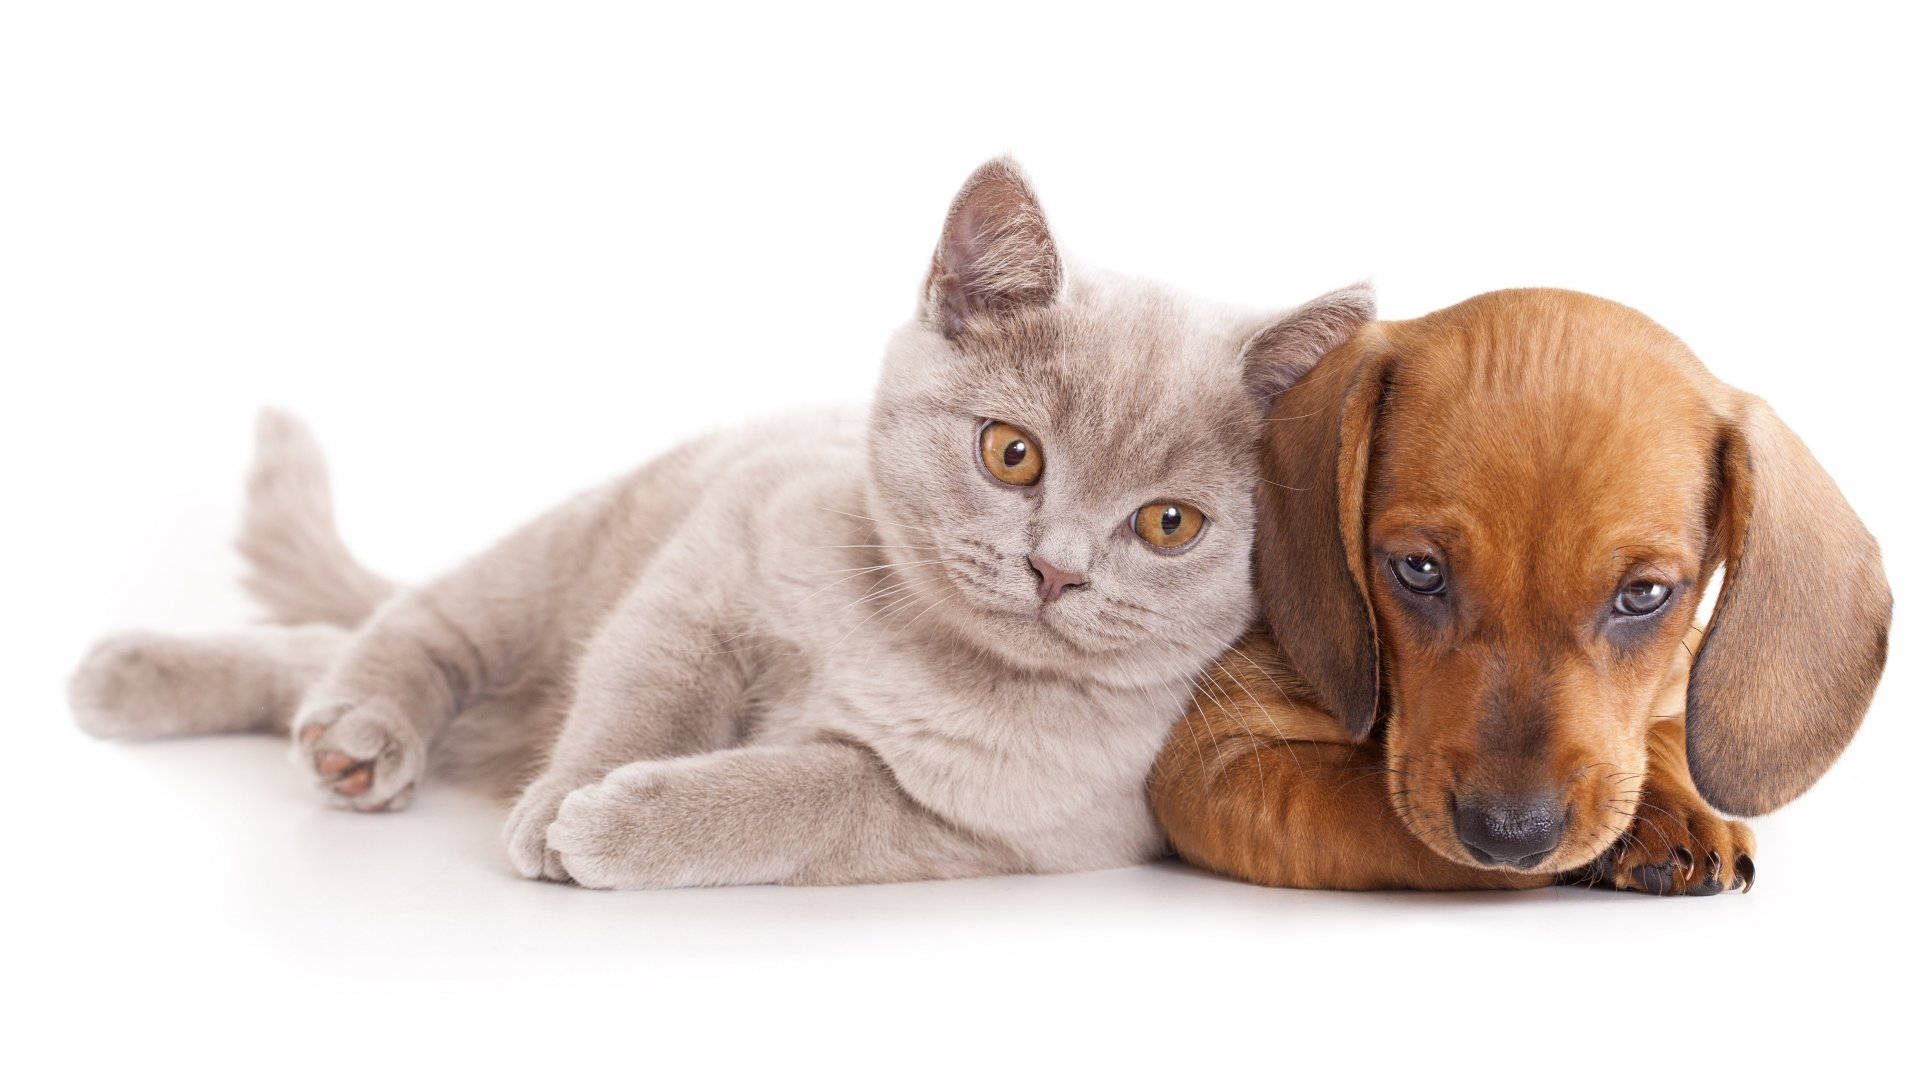 Cat And Dog Background Wallpaper